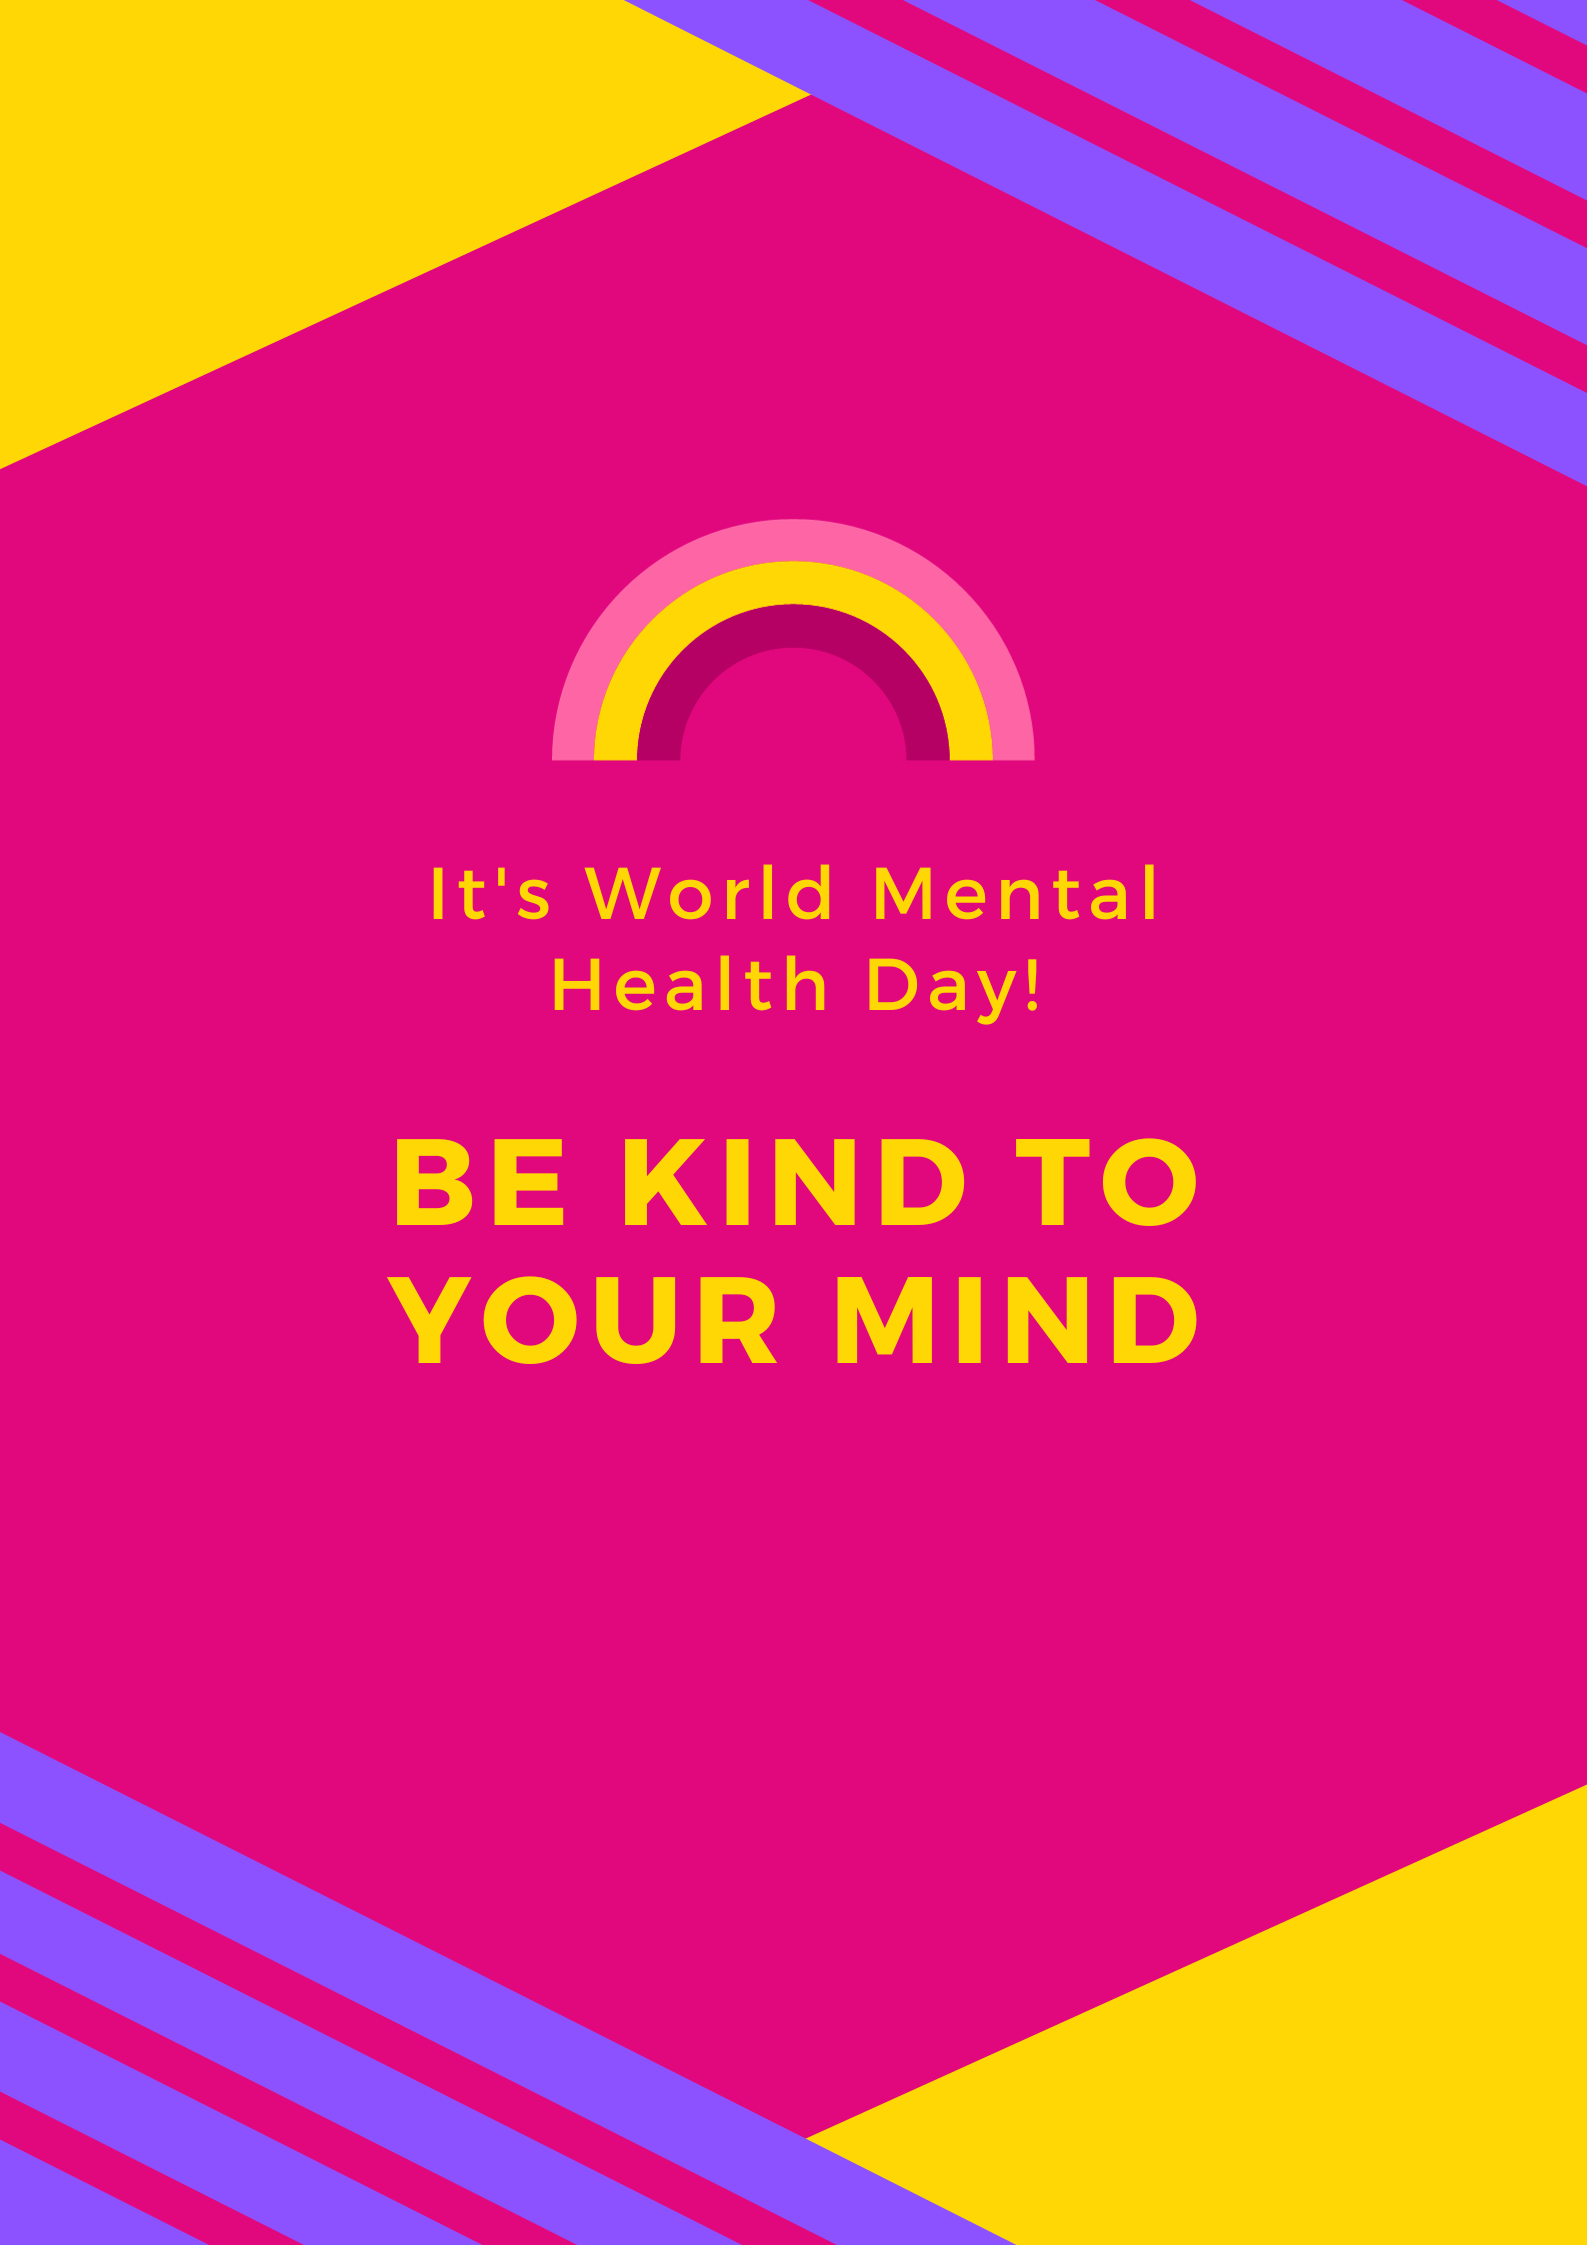 World Mental Health Day - Be Kind to Your Mind